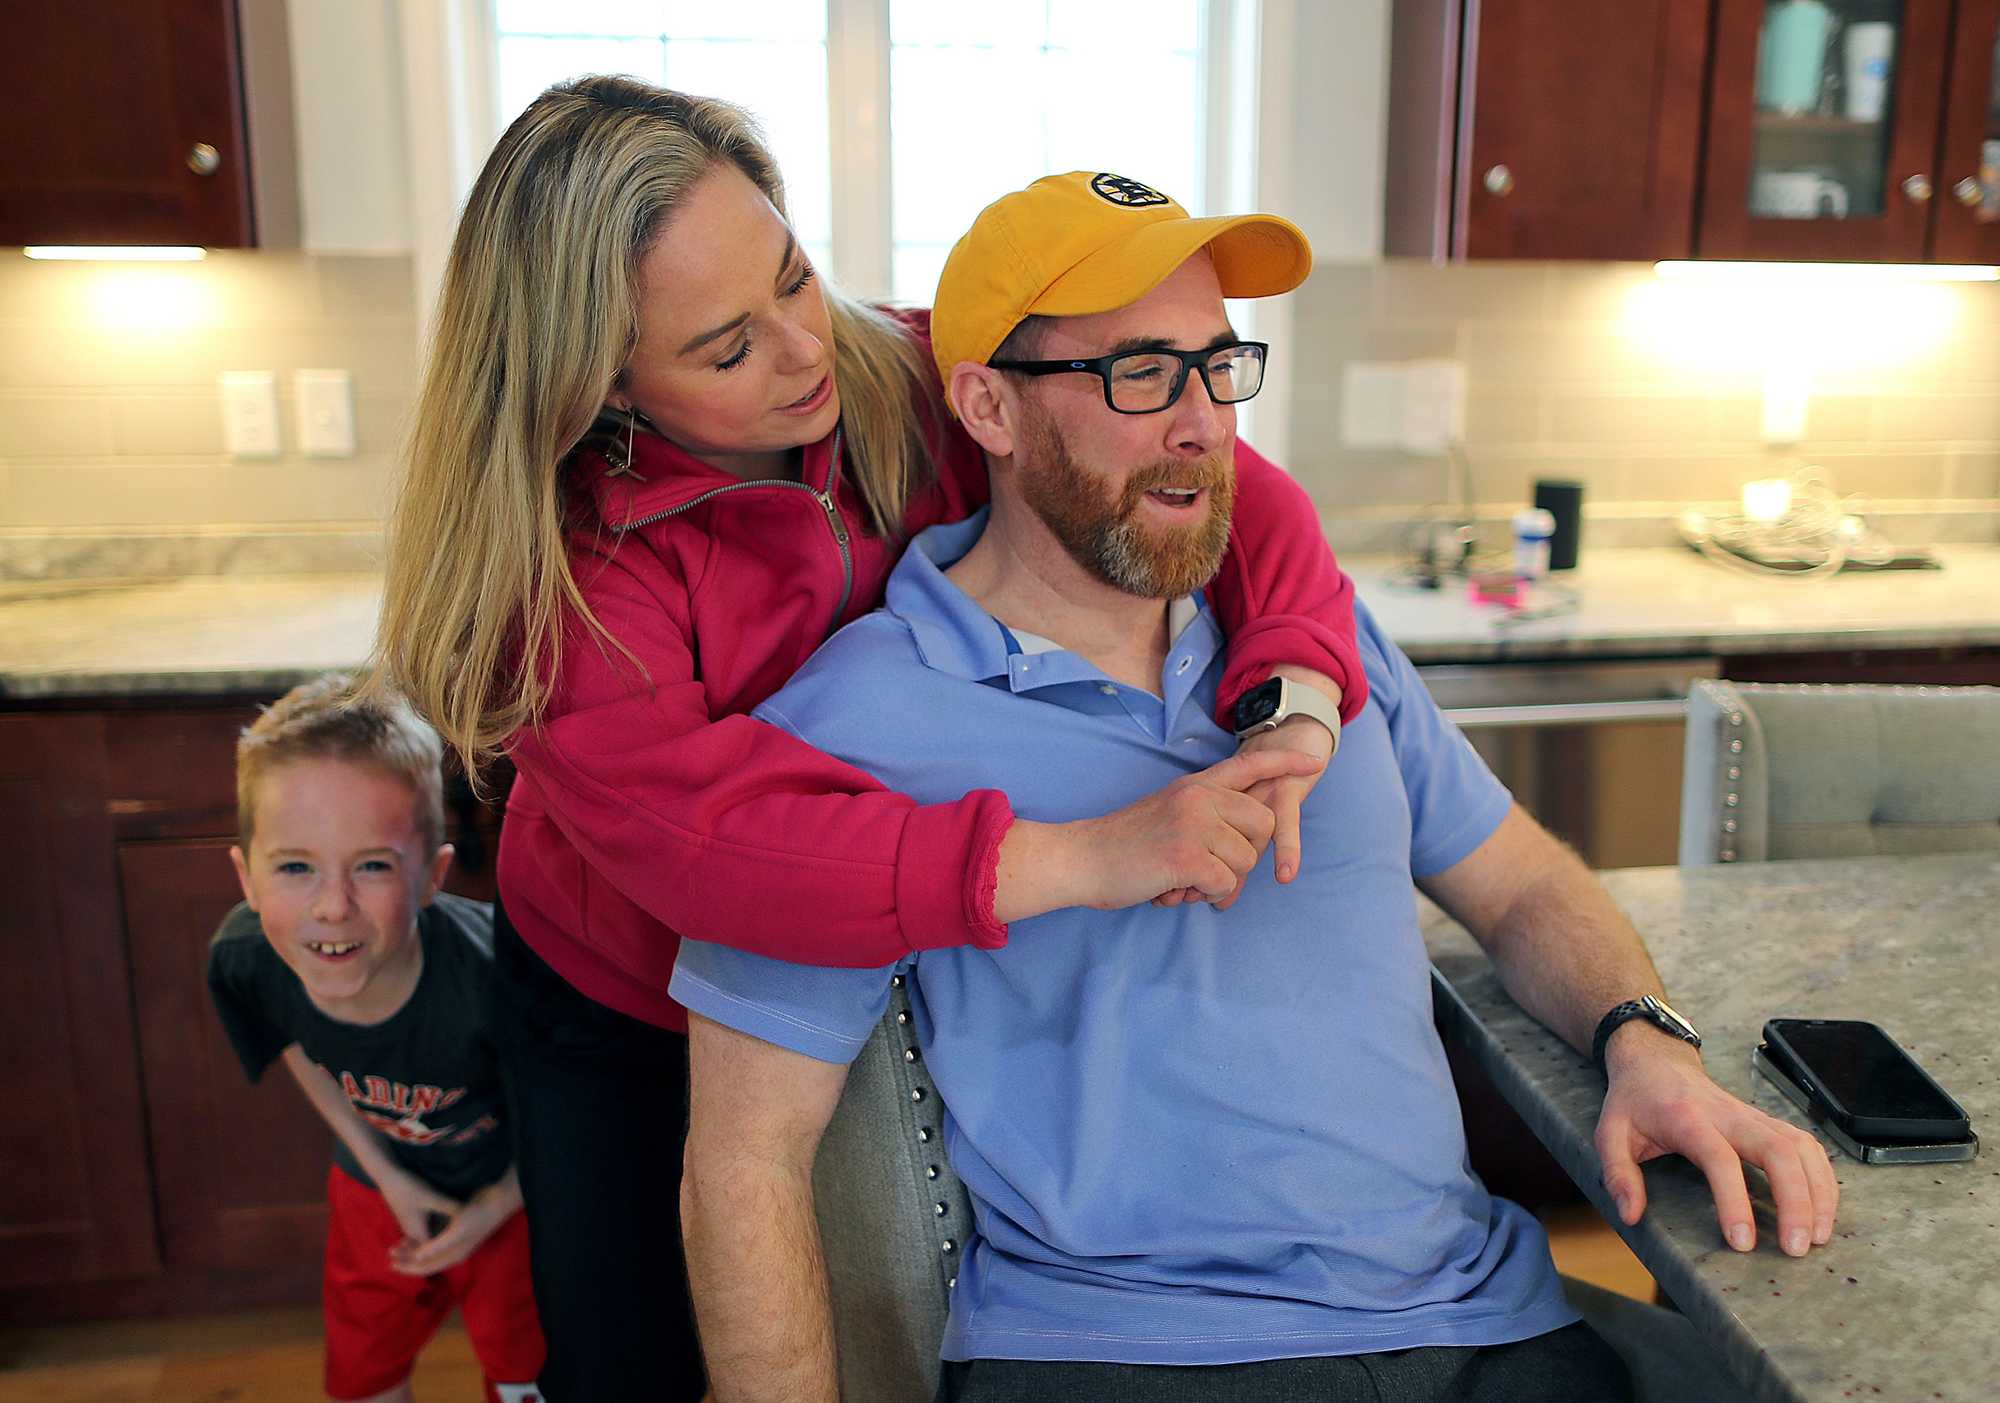 Dic Donohue was hugged by wife Kim in the kitchen of their home as their 6-year-old son, Connor, looked on.